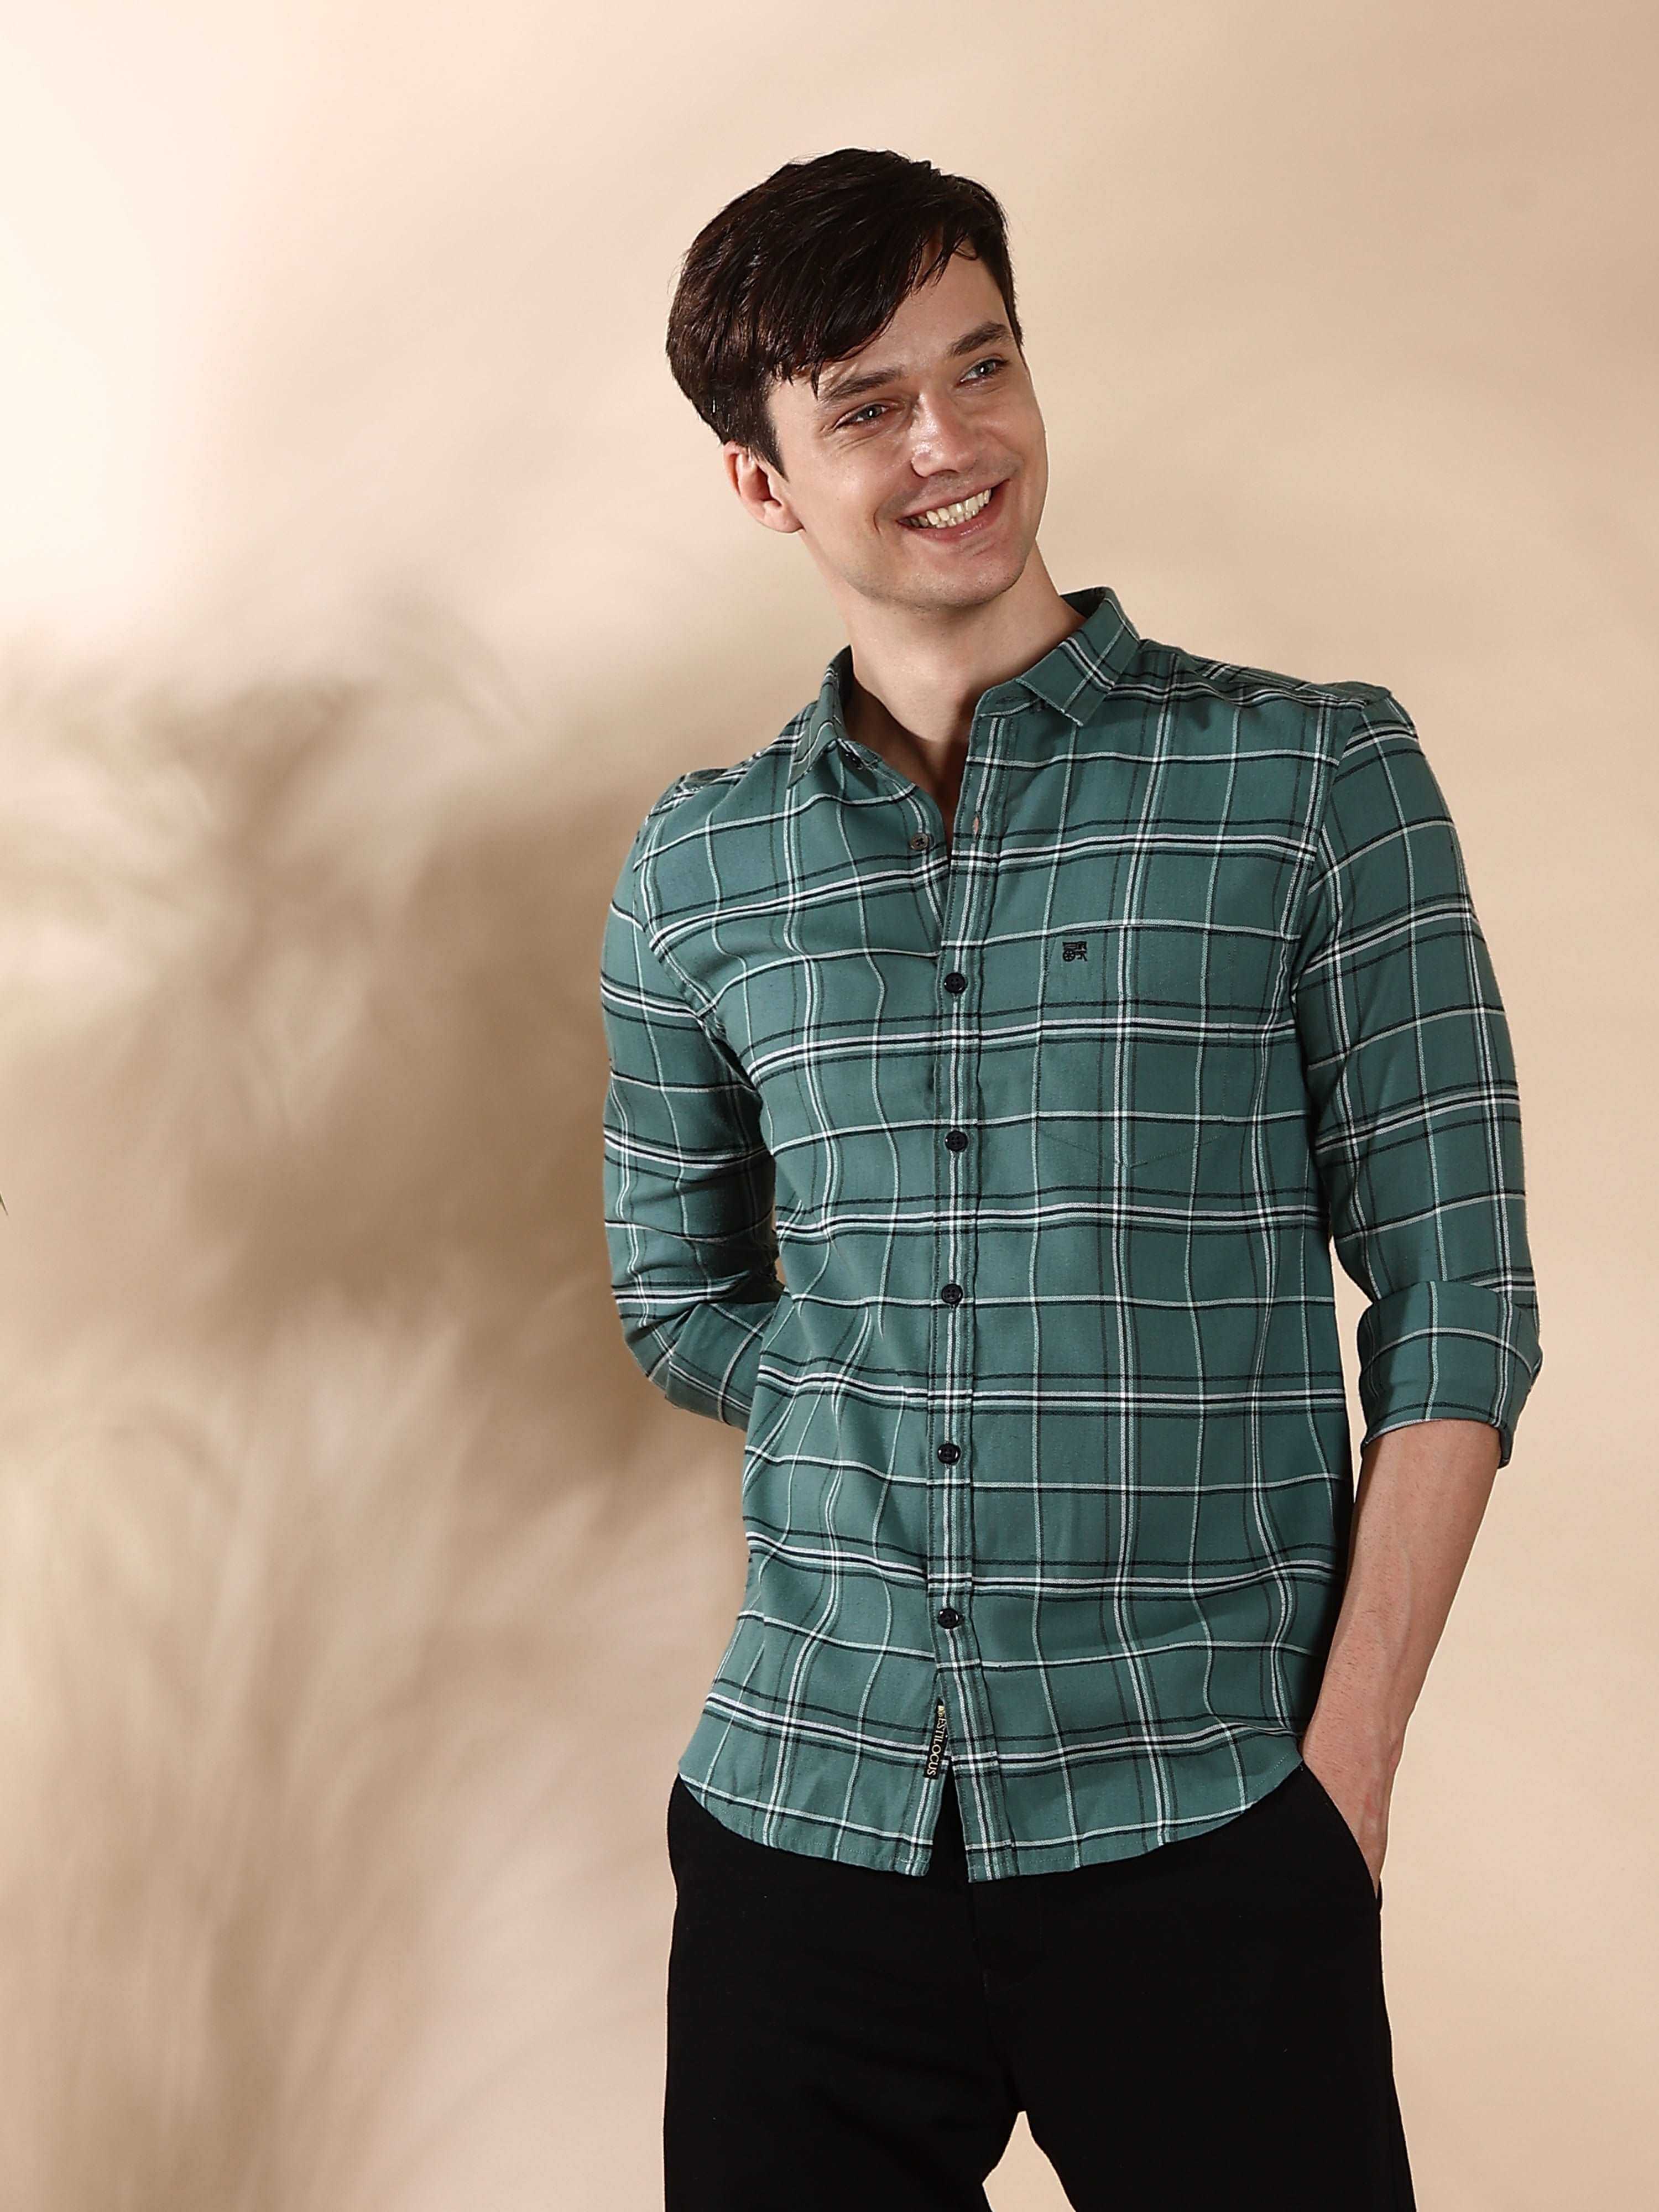 BR Green & Gray casual check full sleeve shirt shop online at Estilocus. • 100% PREMIUM COTTON • Full-sleeve solid shirt• Cut and sew placket• Regular collar• Double button square cuff.• Single pocket with logo embroidery• Curved hemline• Finest quality s